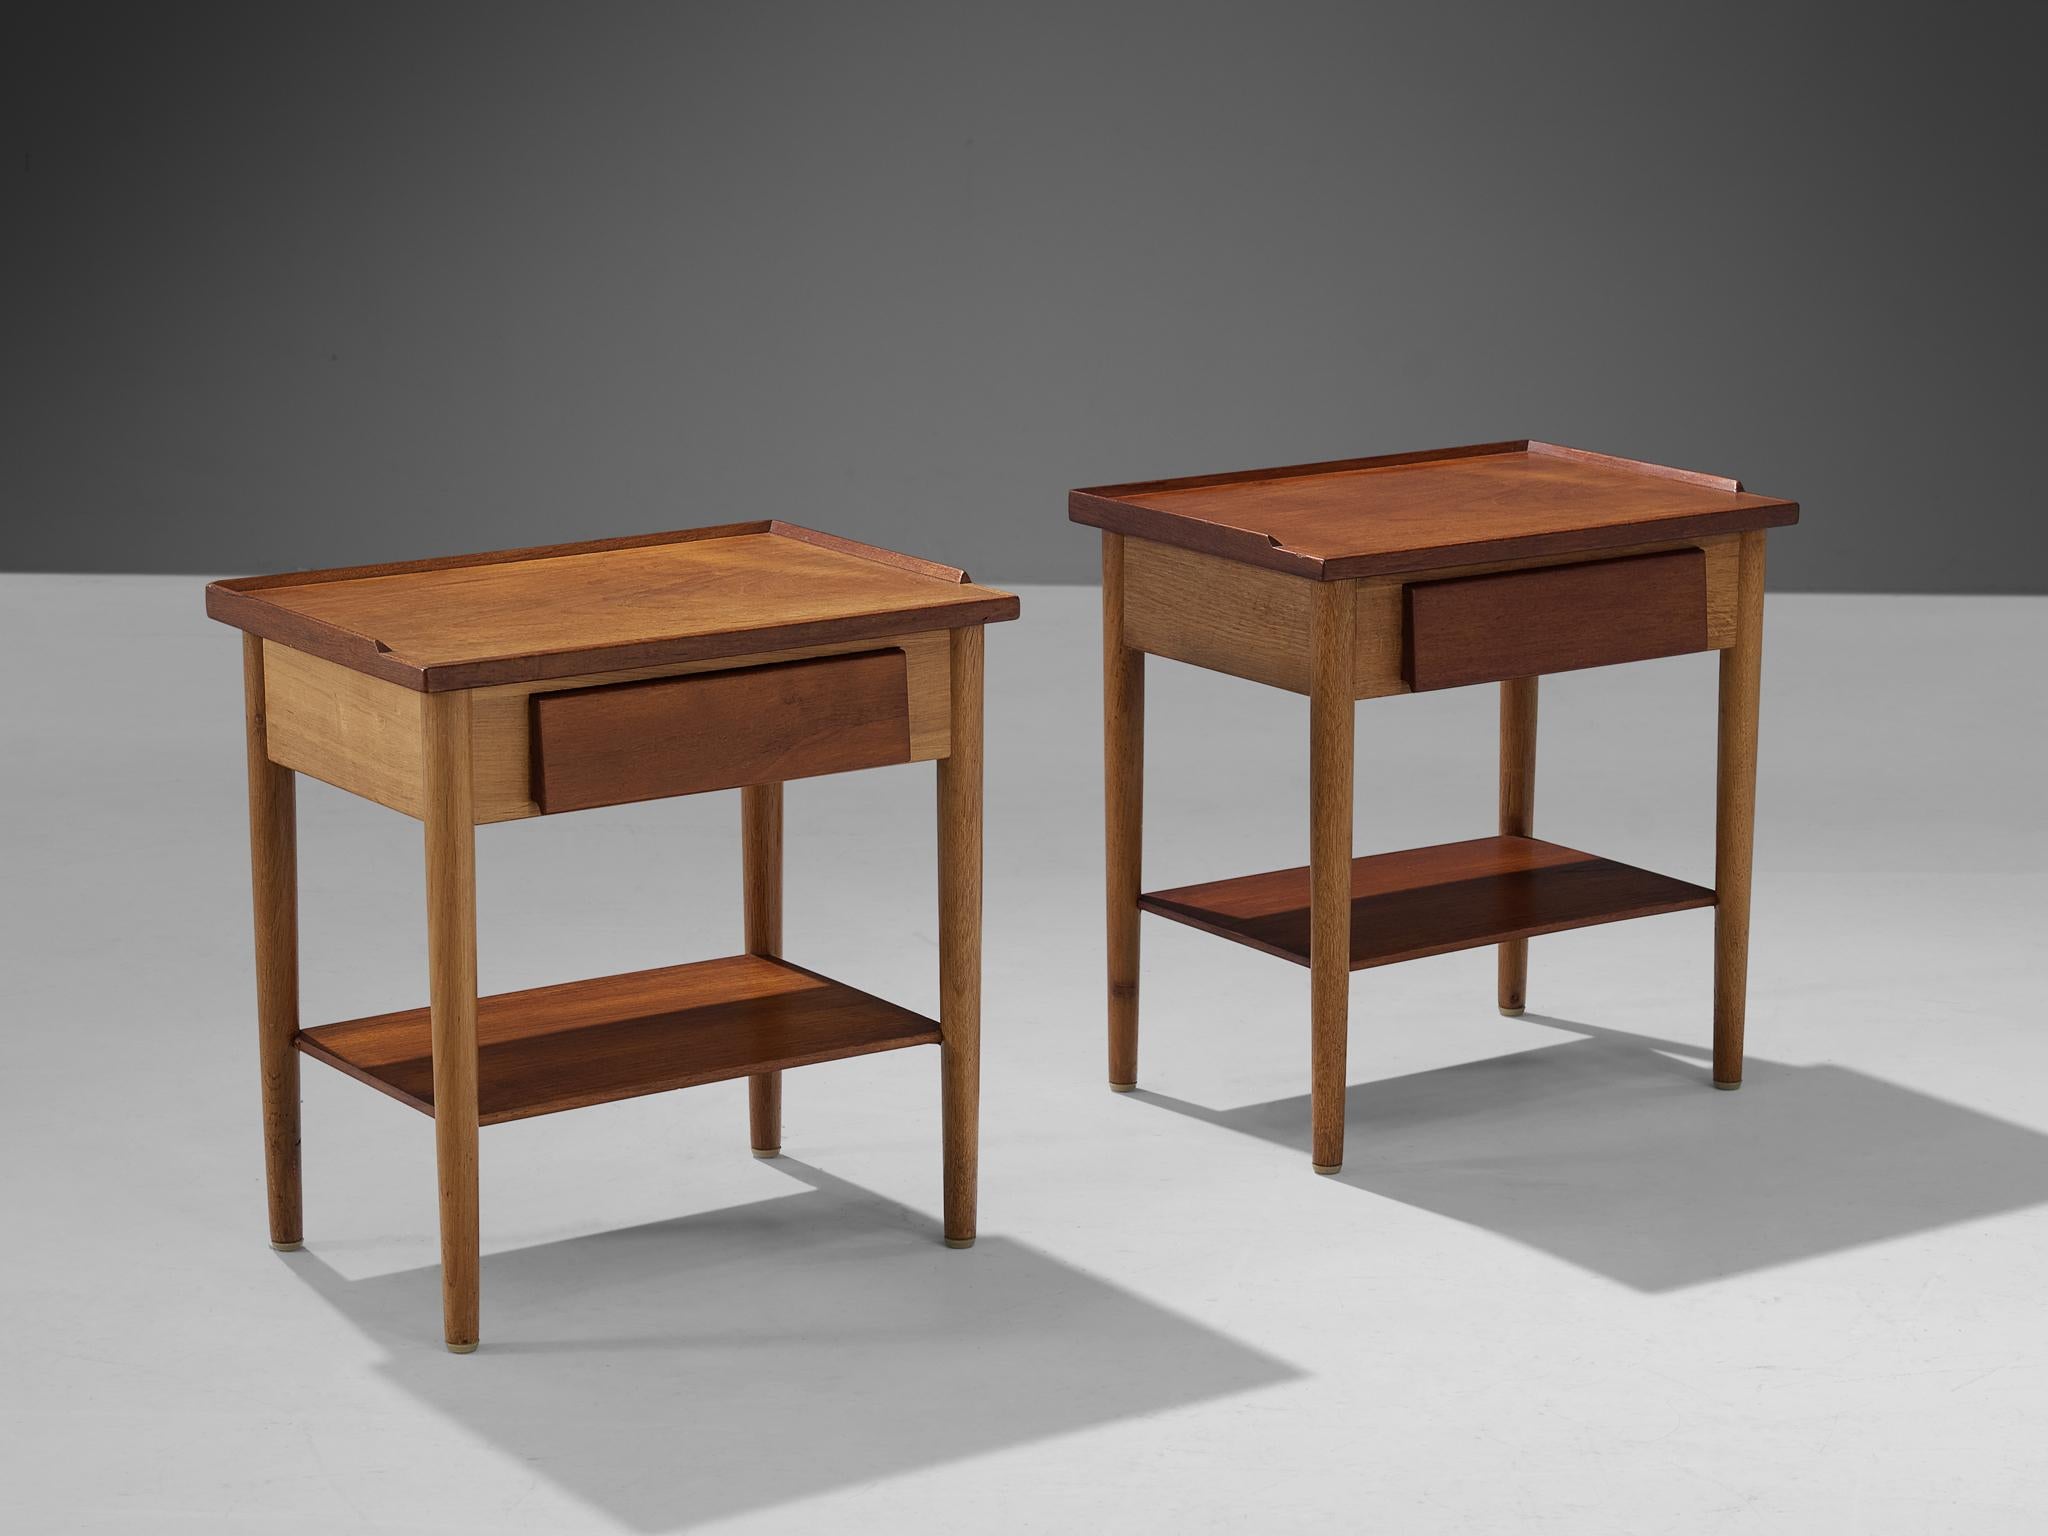 Nightstands, teak, oak, Denmark, 1960s.

The design of this pair of nightstands shows a strong and solid construction executed in teak and oak. This is realized by the sharp and clear lines which are visible at the edges of the top and at the